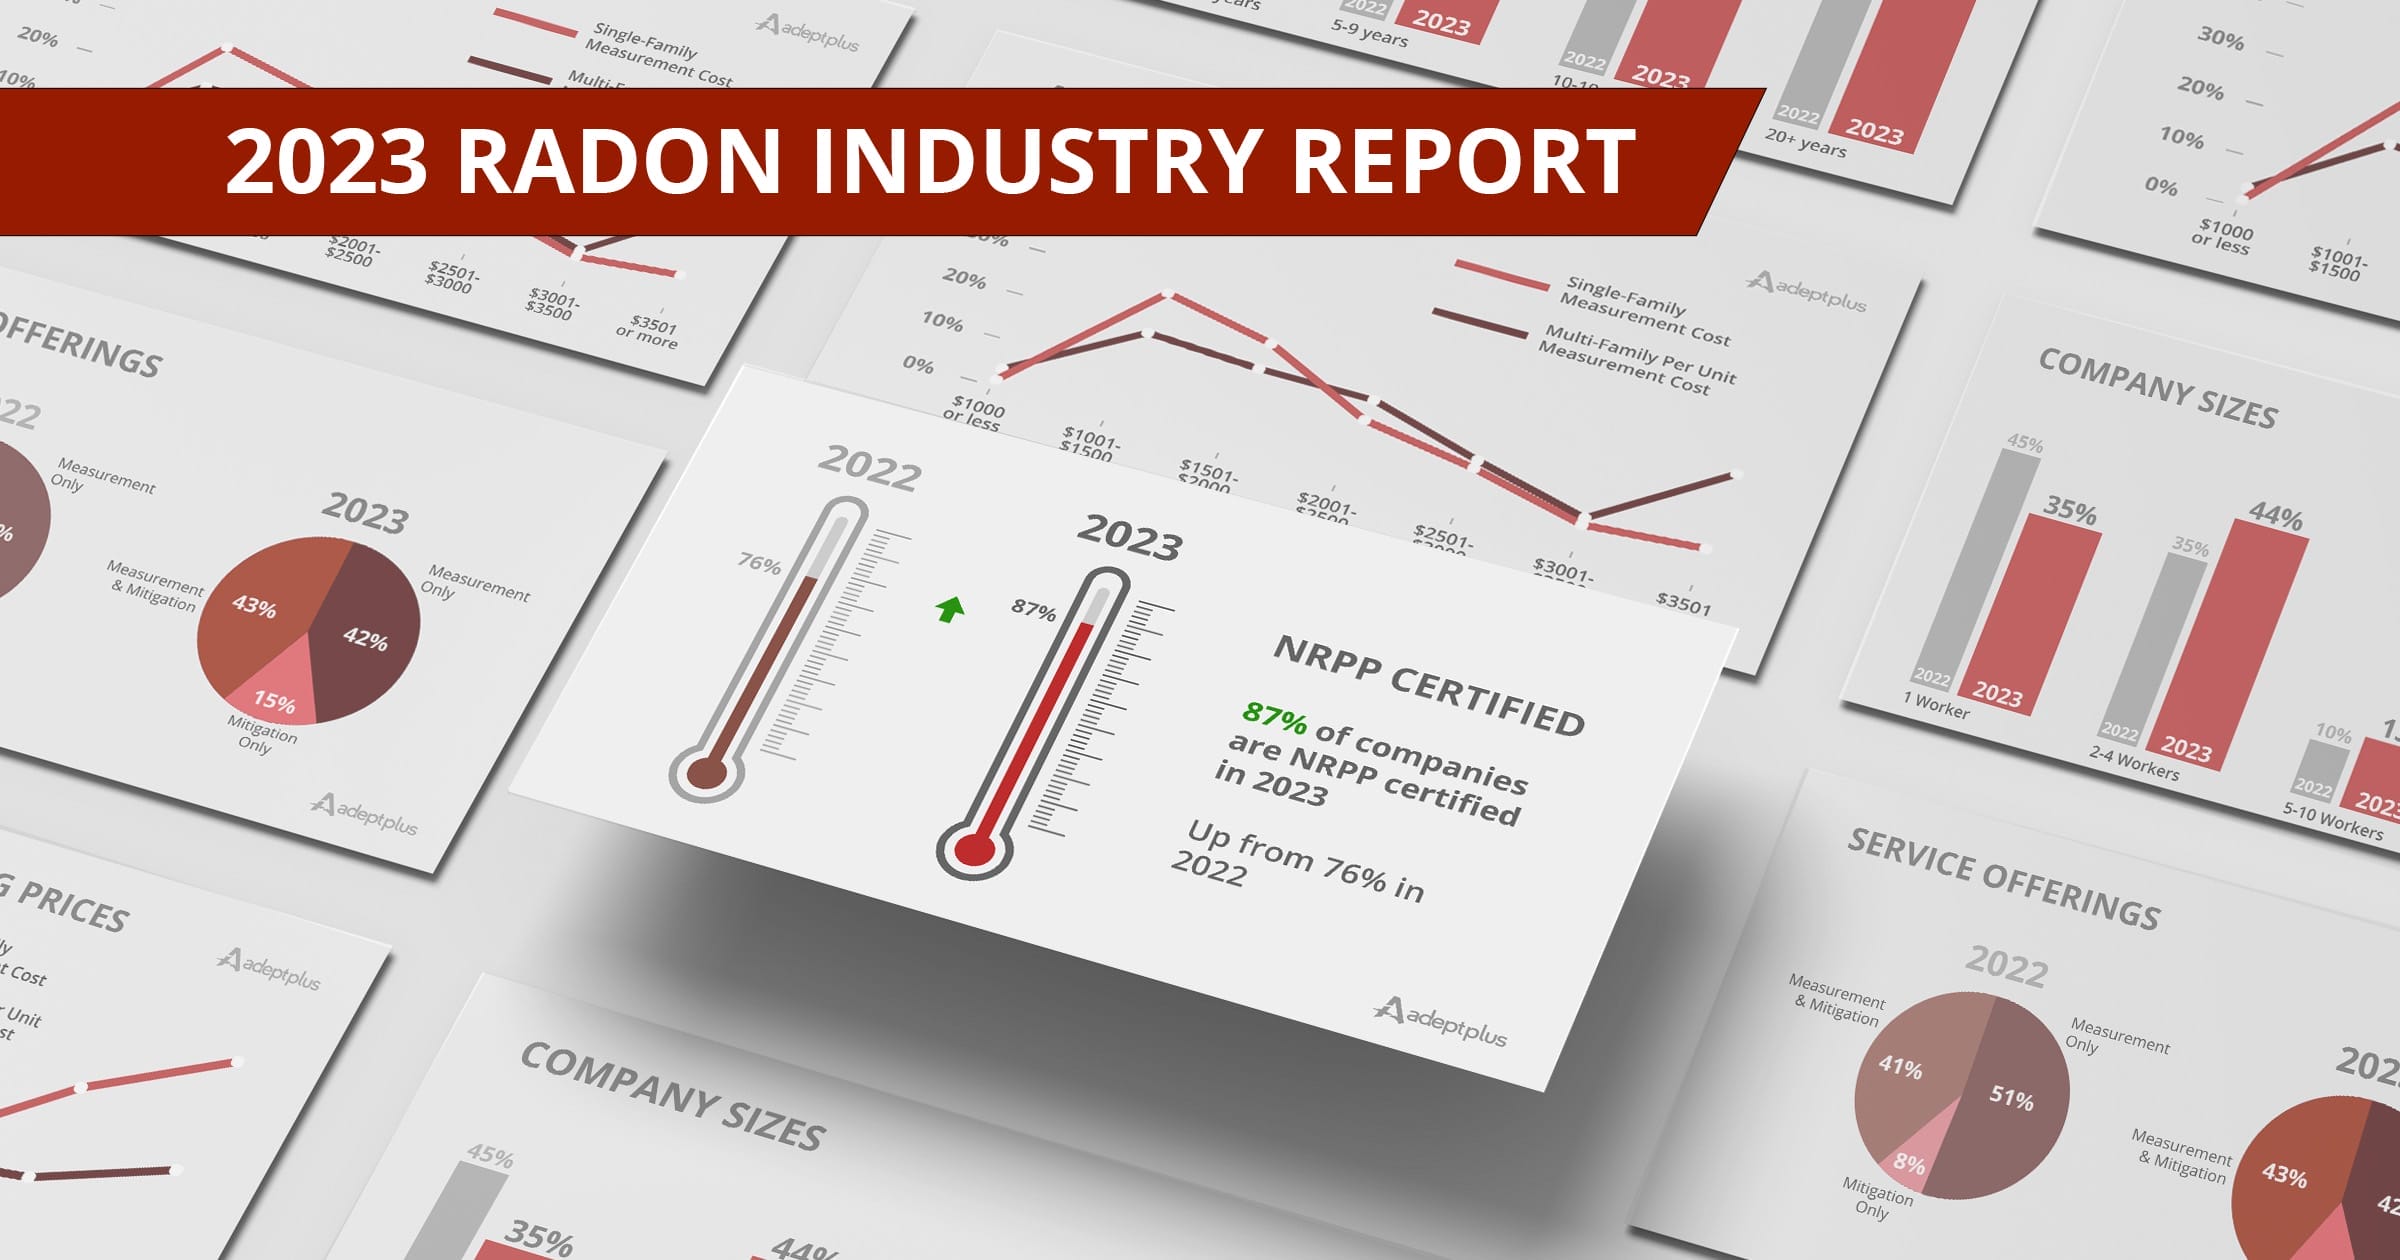 Radon Industry Report From The 2023 Data